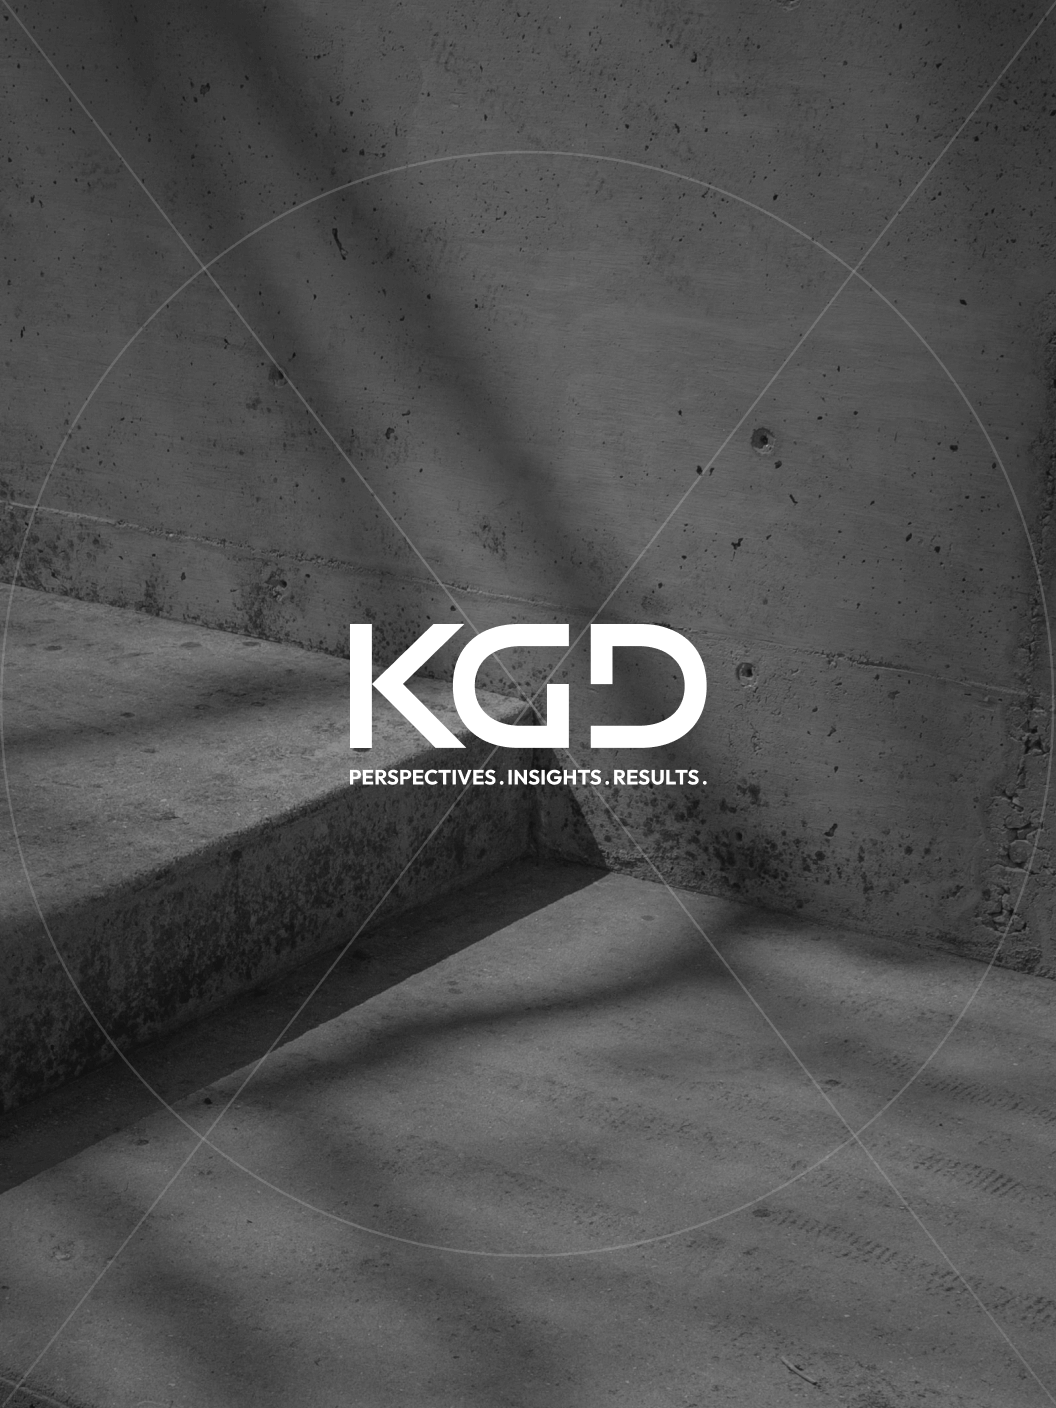 KGD Architecture